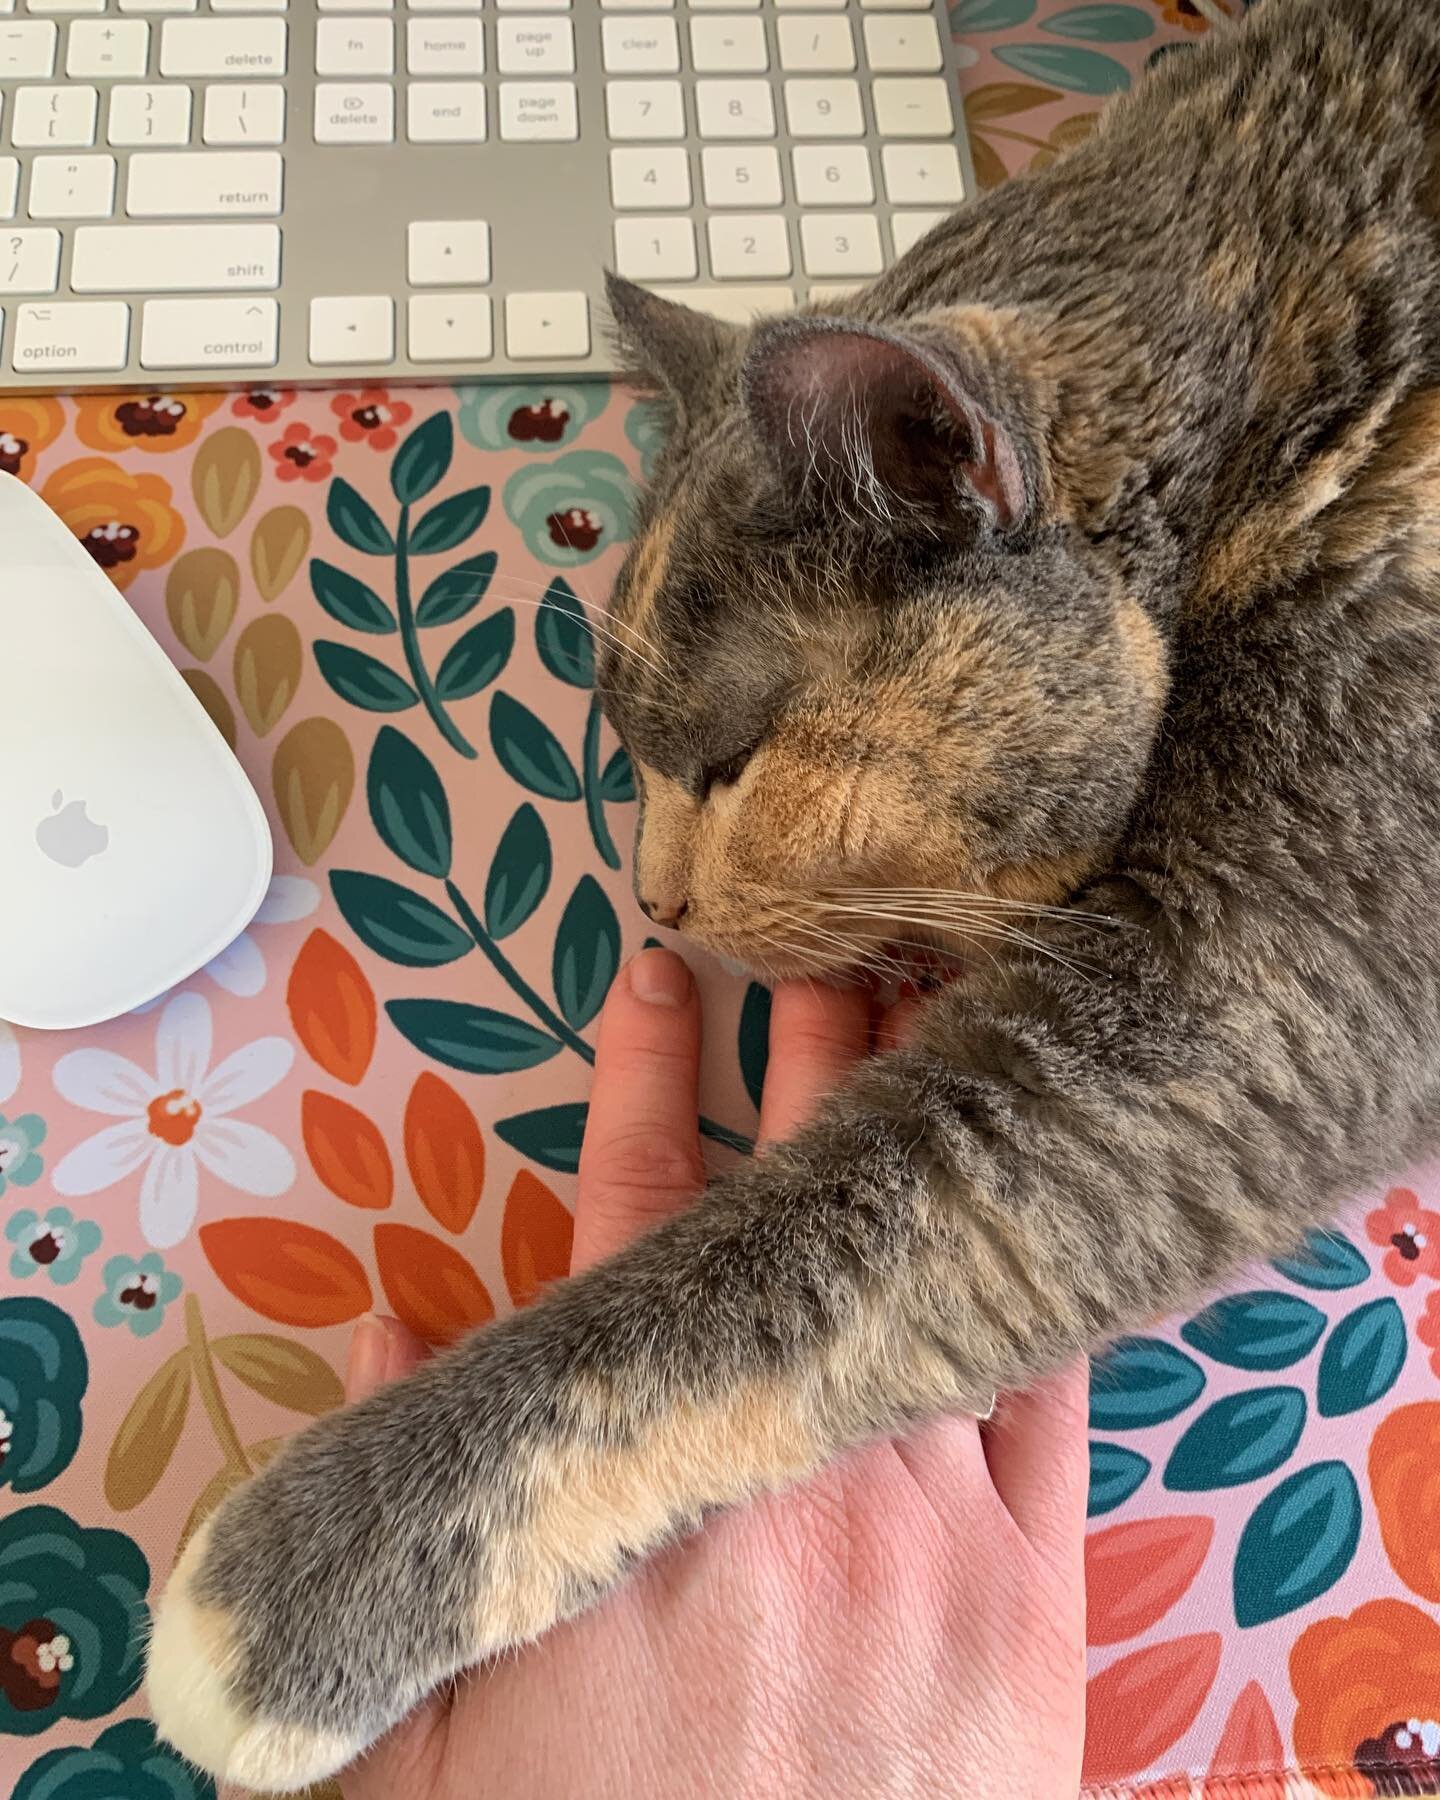 Happy Friday designing friends! My assistant is entirely unhelpful today. 😆
💕 love, your designer